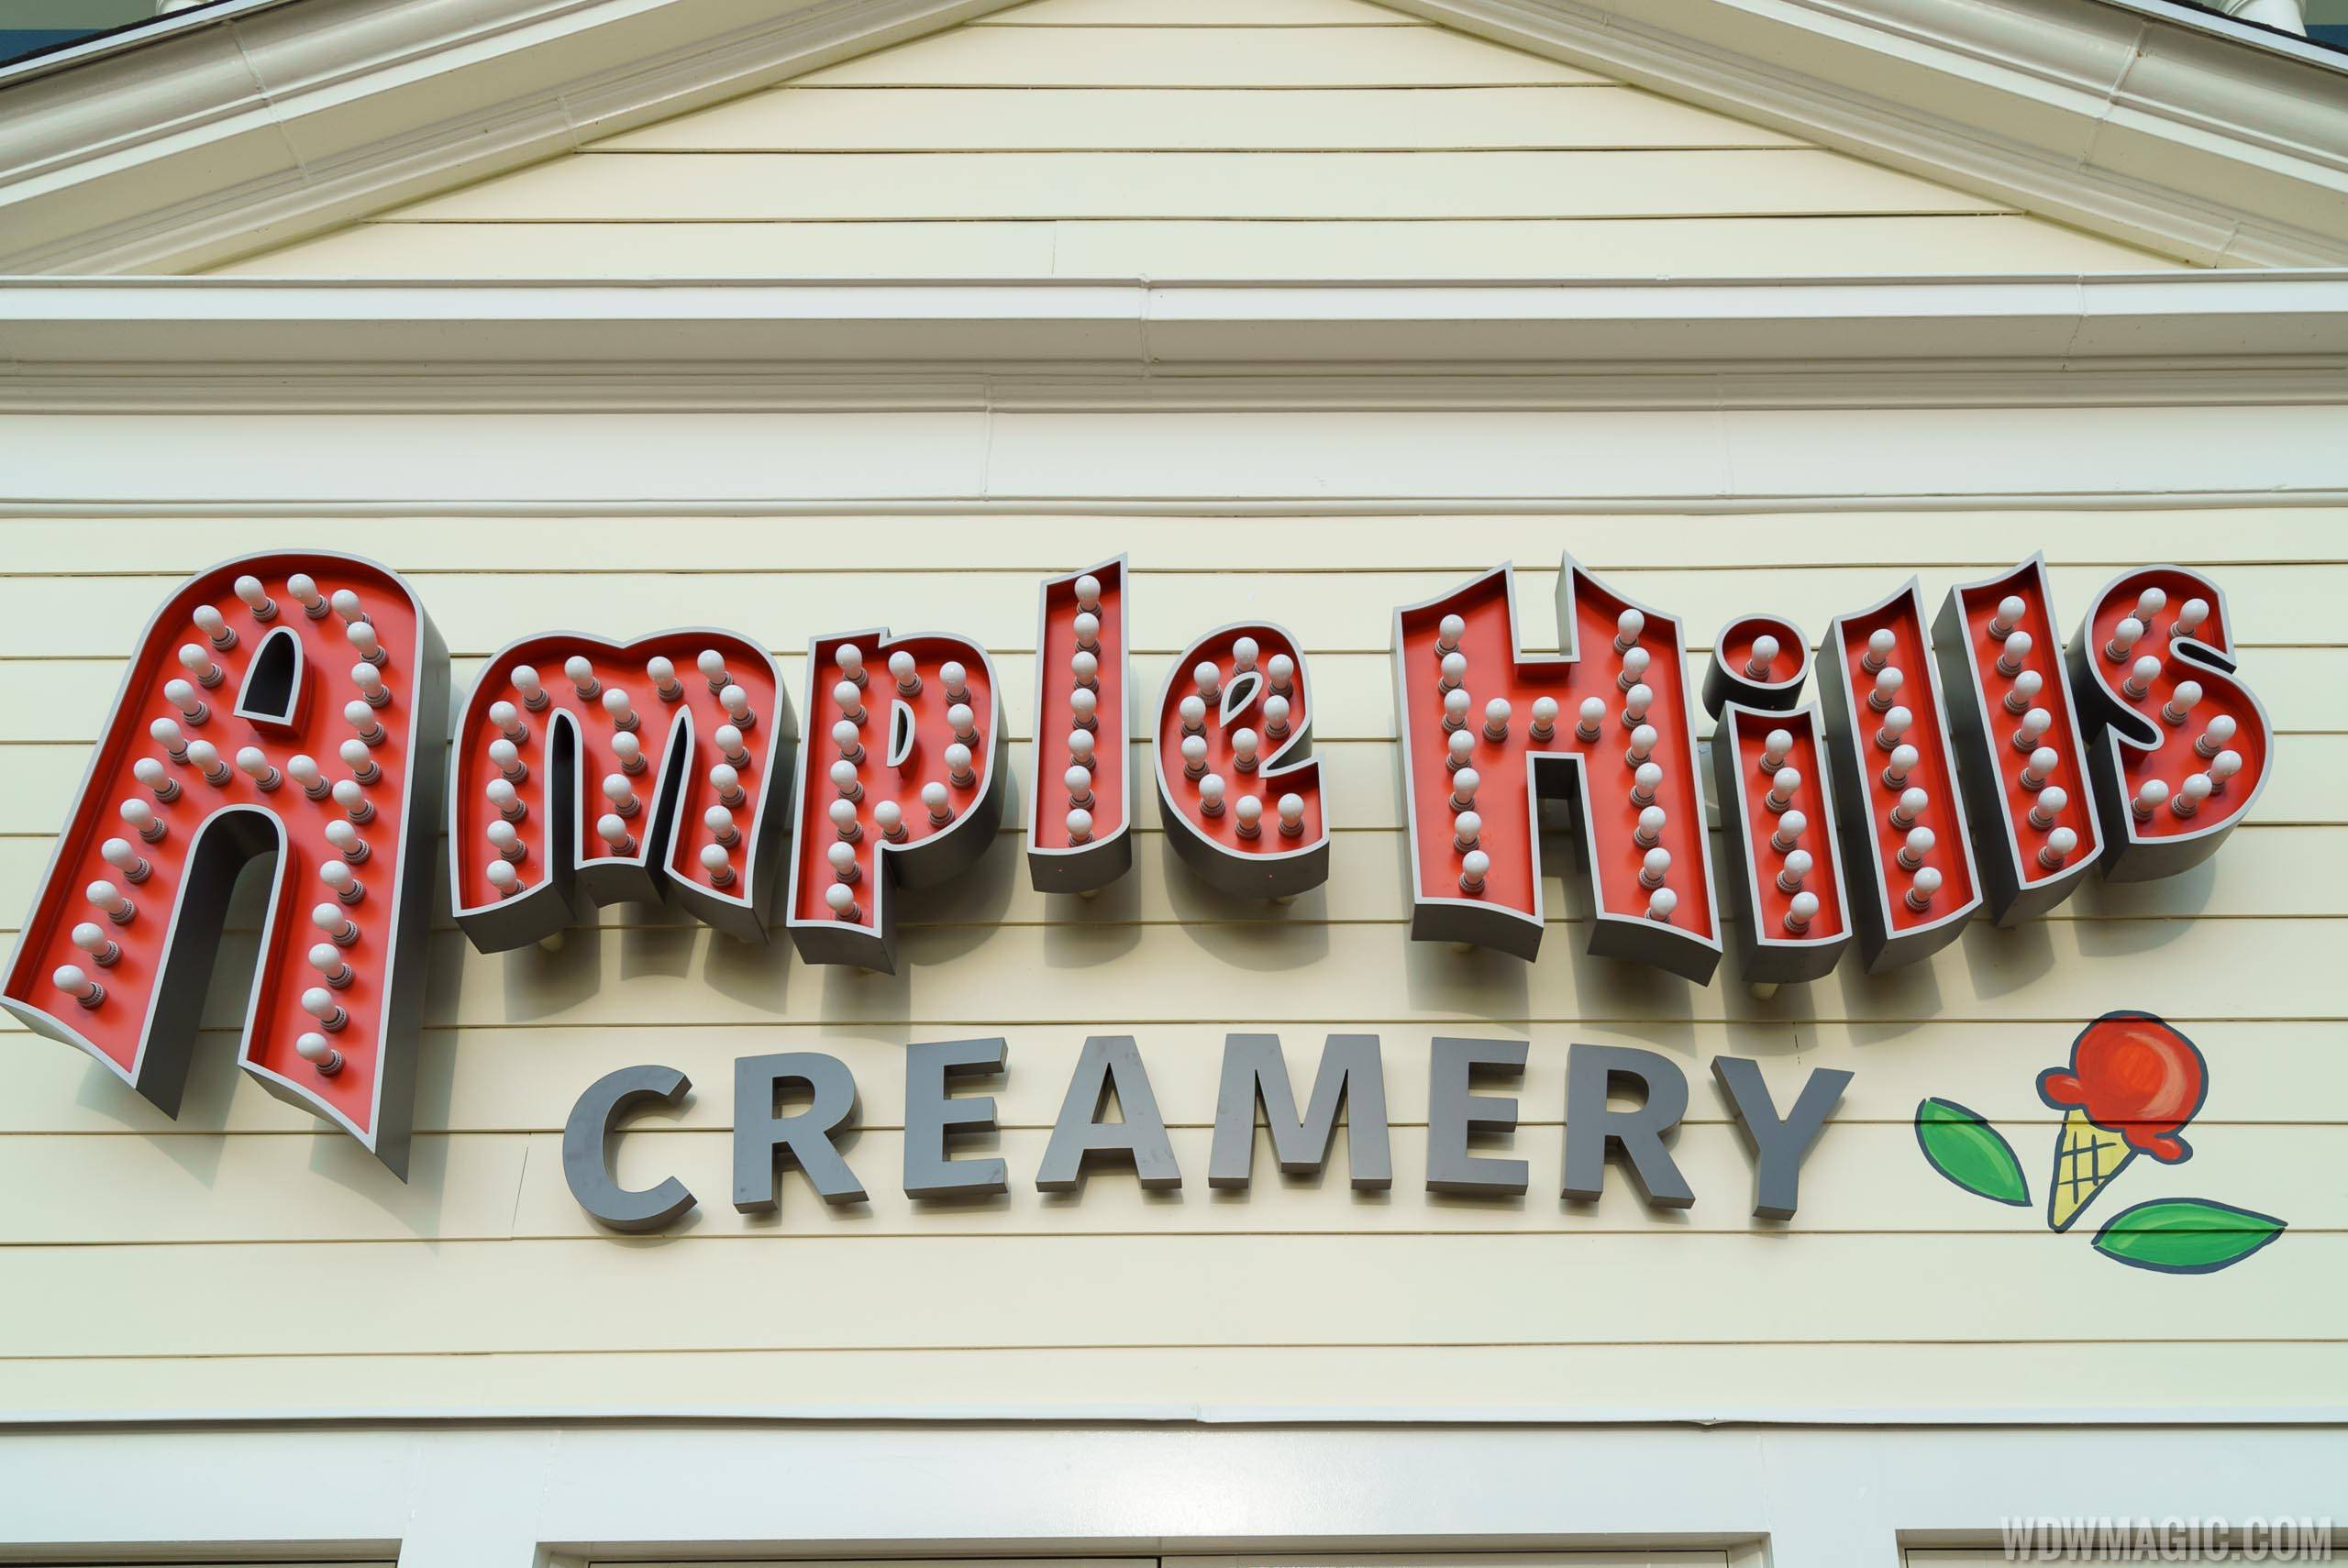 Ample Hills Creamery sign at the BoardWalk